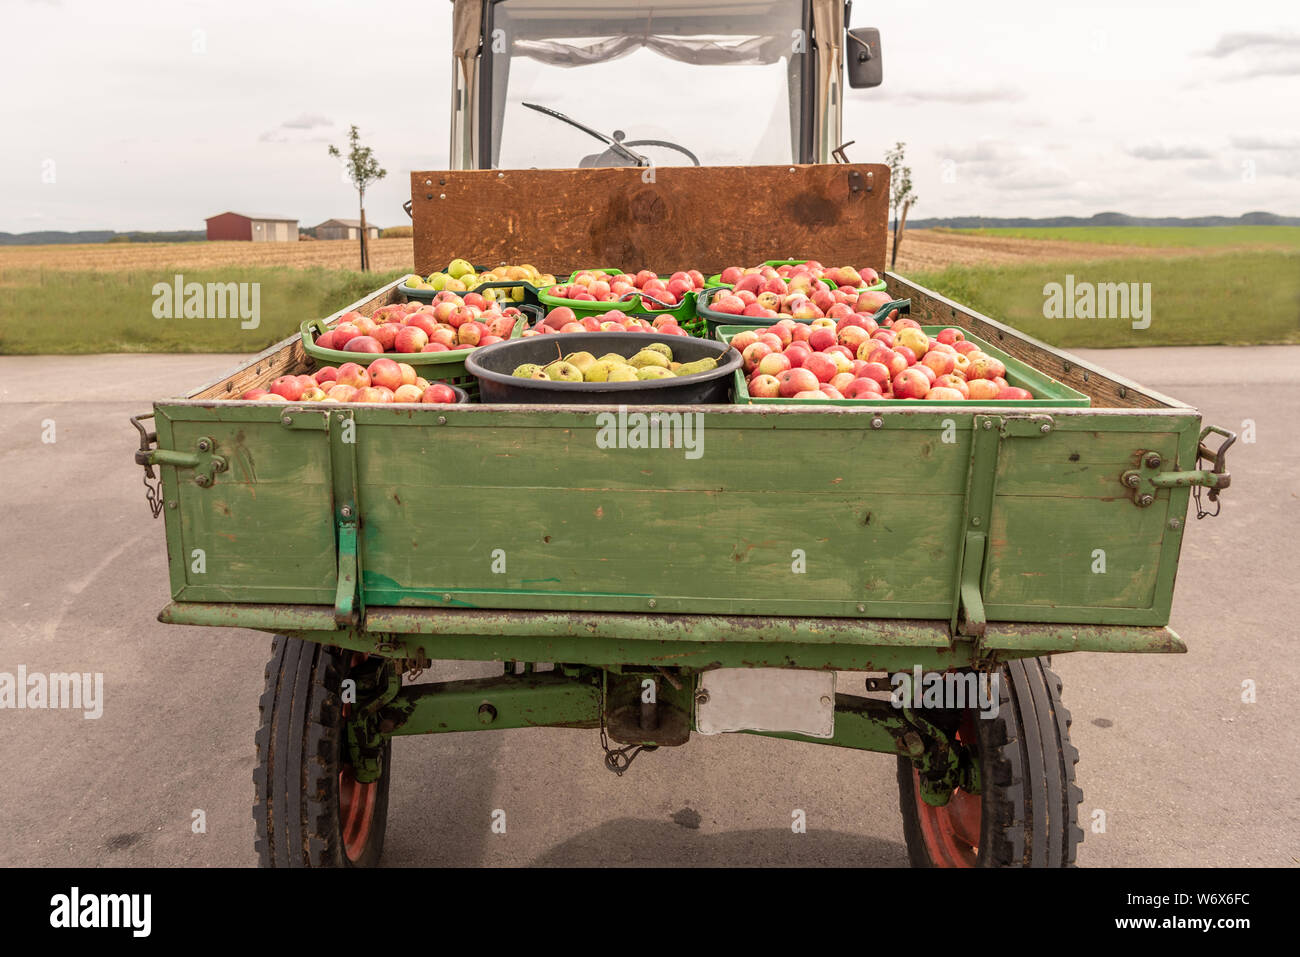 Apple and pears are transported on a front loader after harvesting in autumn. Storage in crates Stock Photo